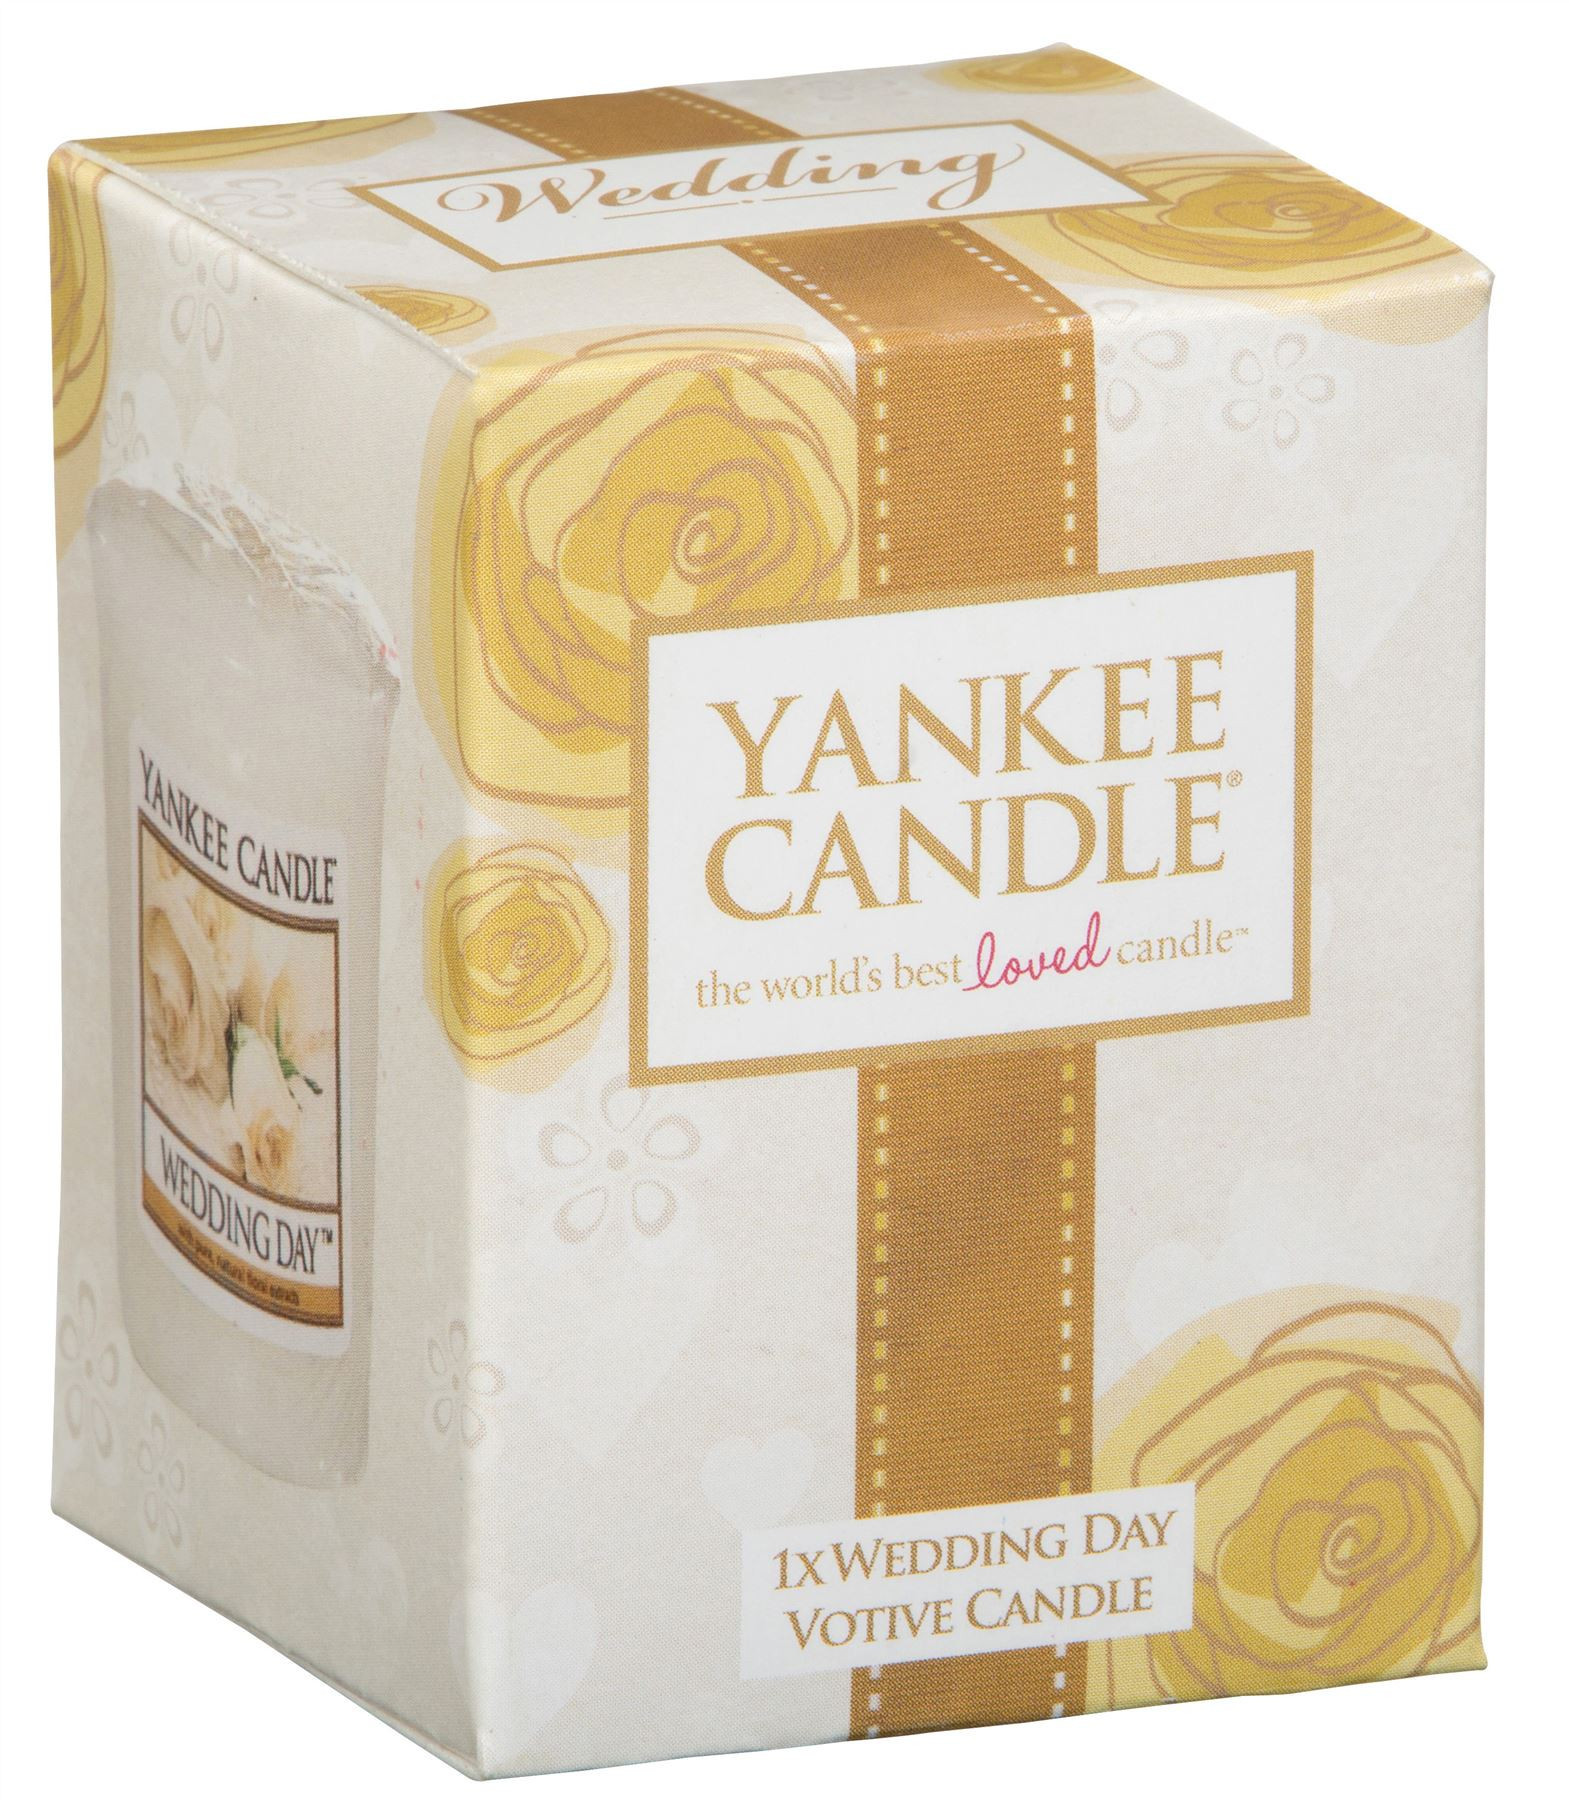 Yankee Candle Wedding Favors
 The 21 Best Ideas for Yankee Candle Wedding Favors Home